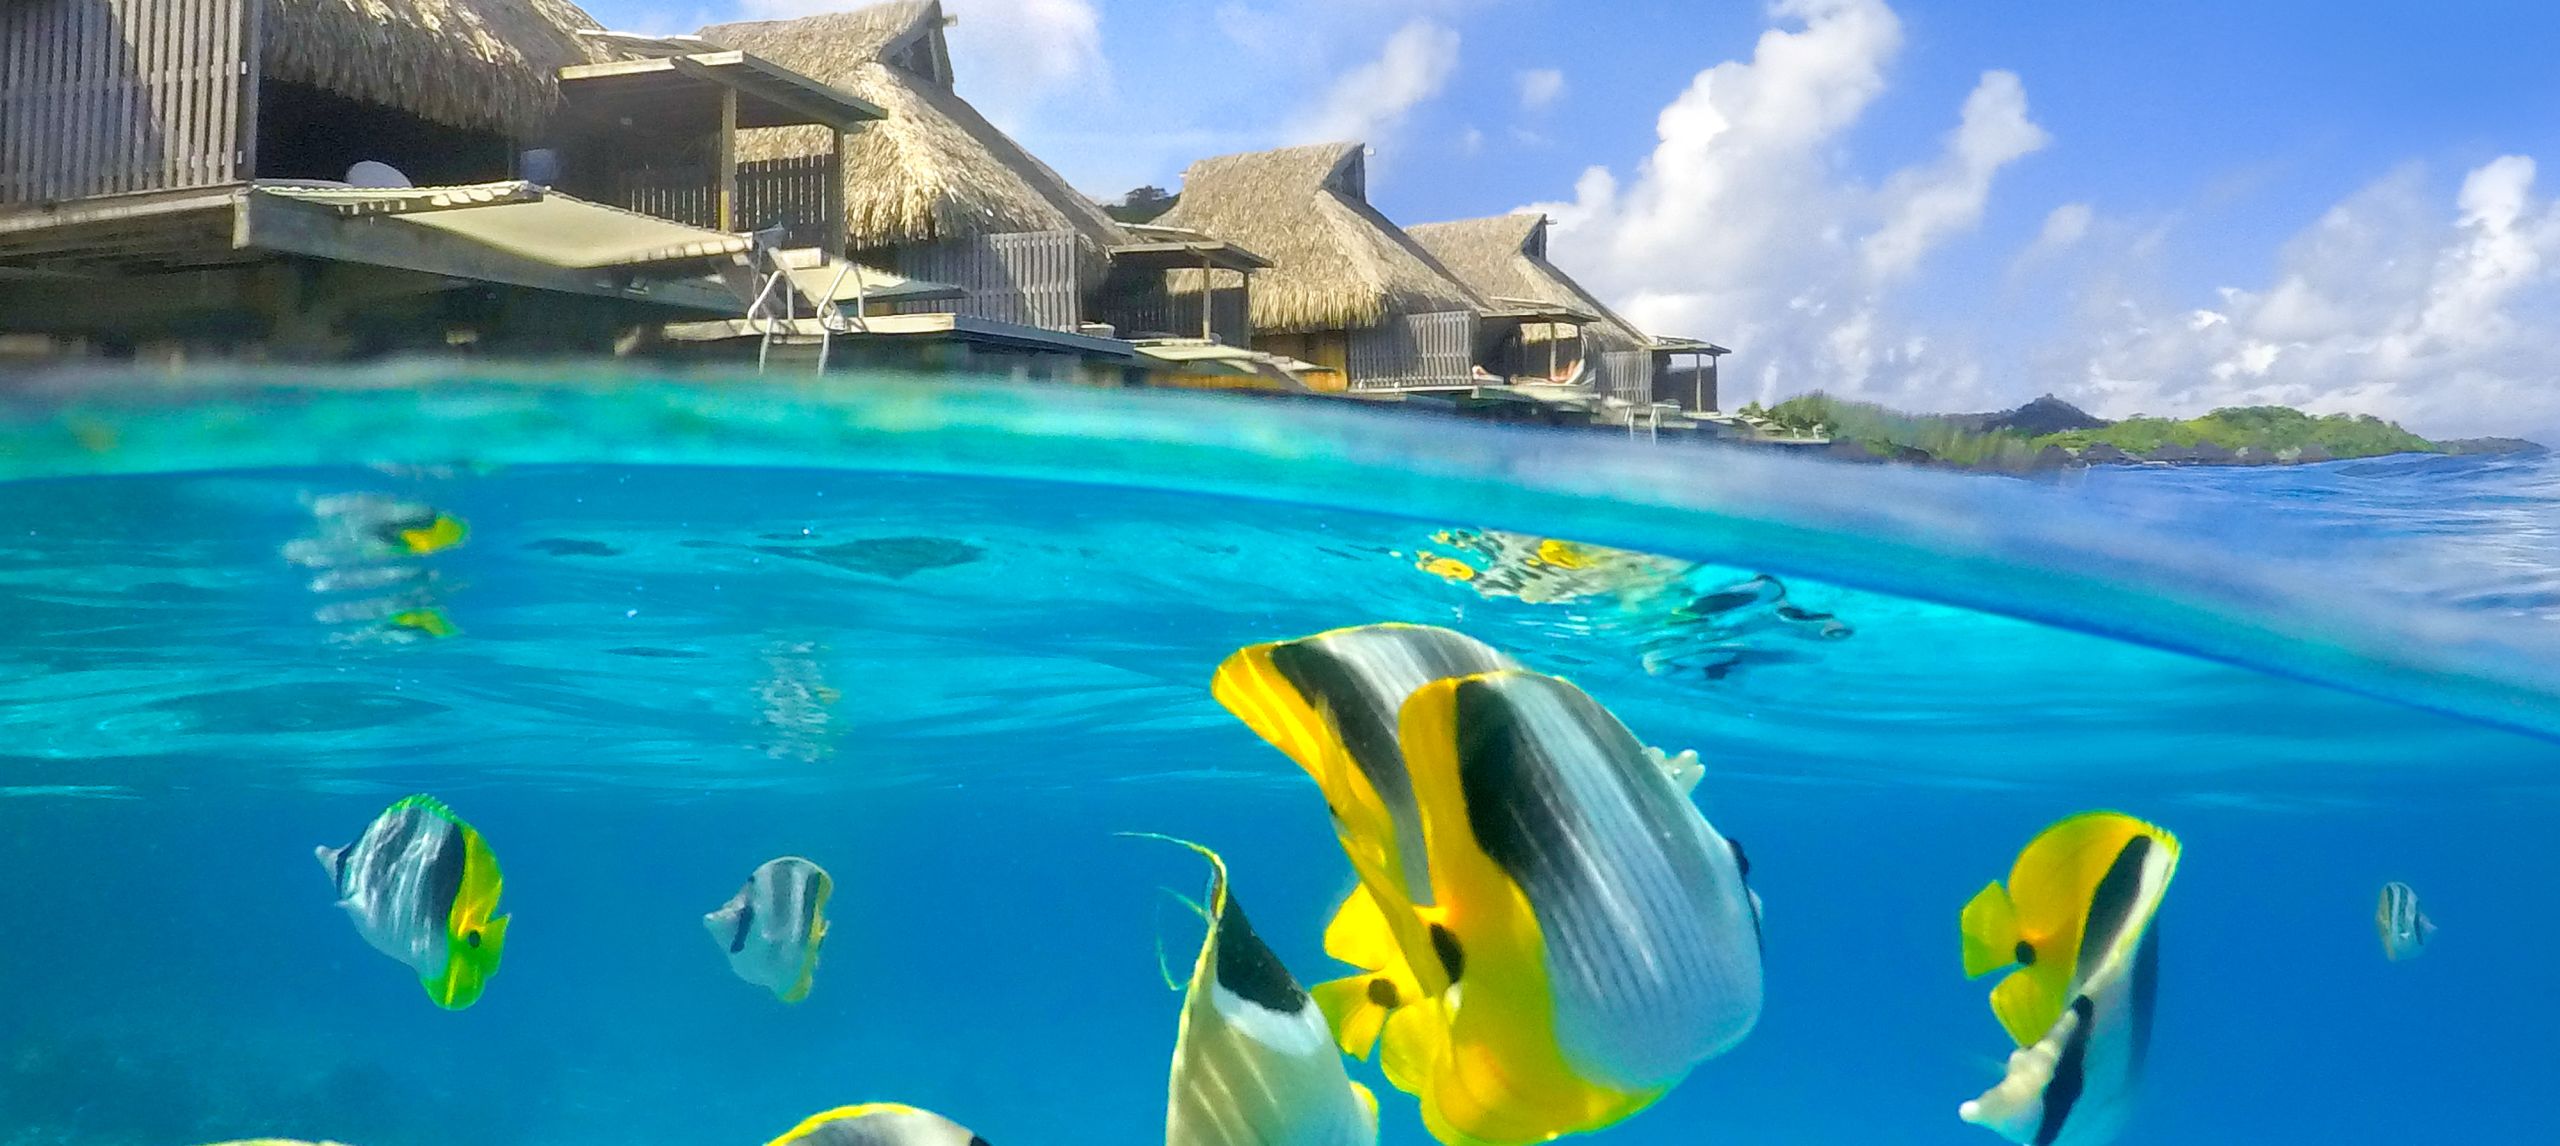 View of Villas and Underwater View with Fish